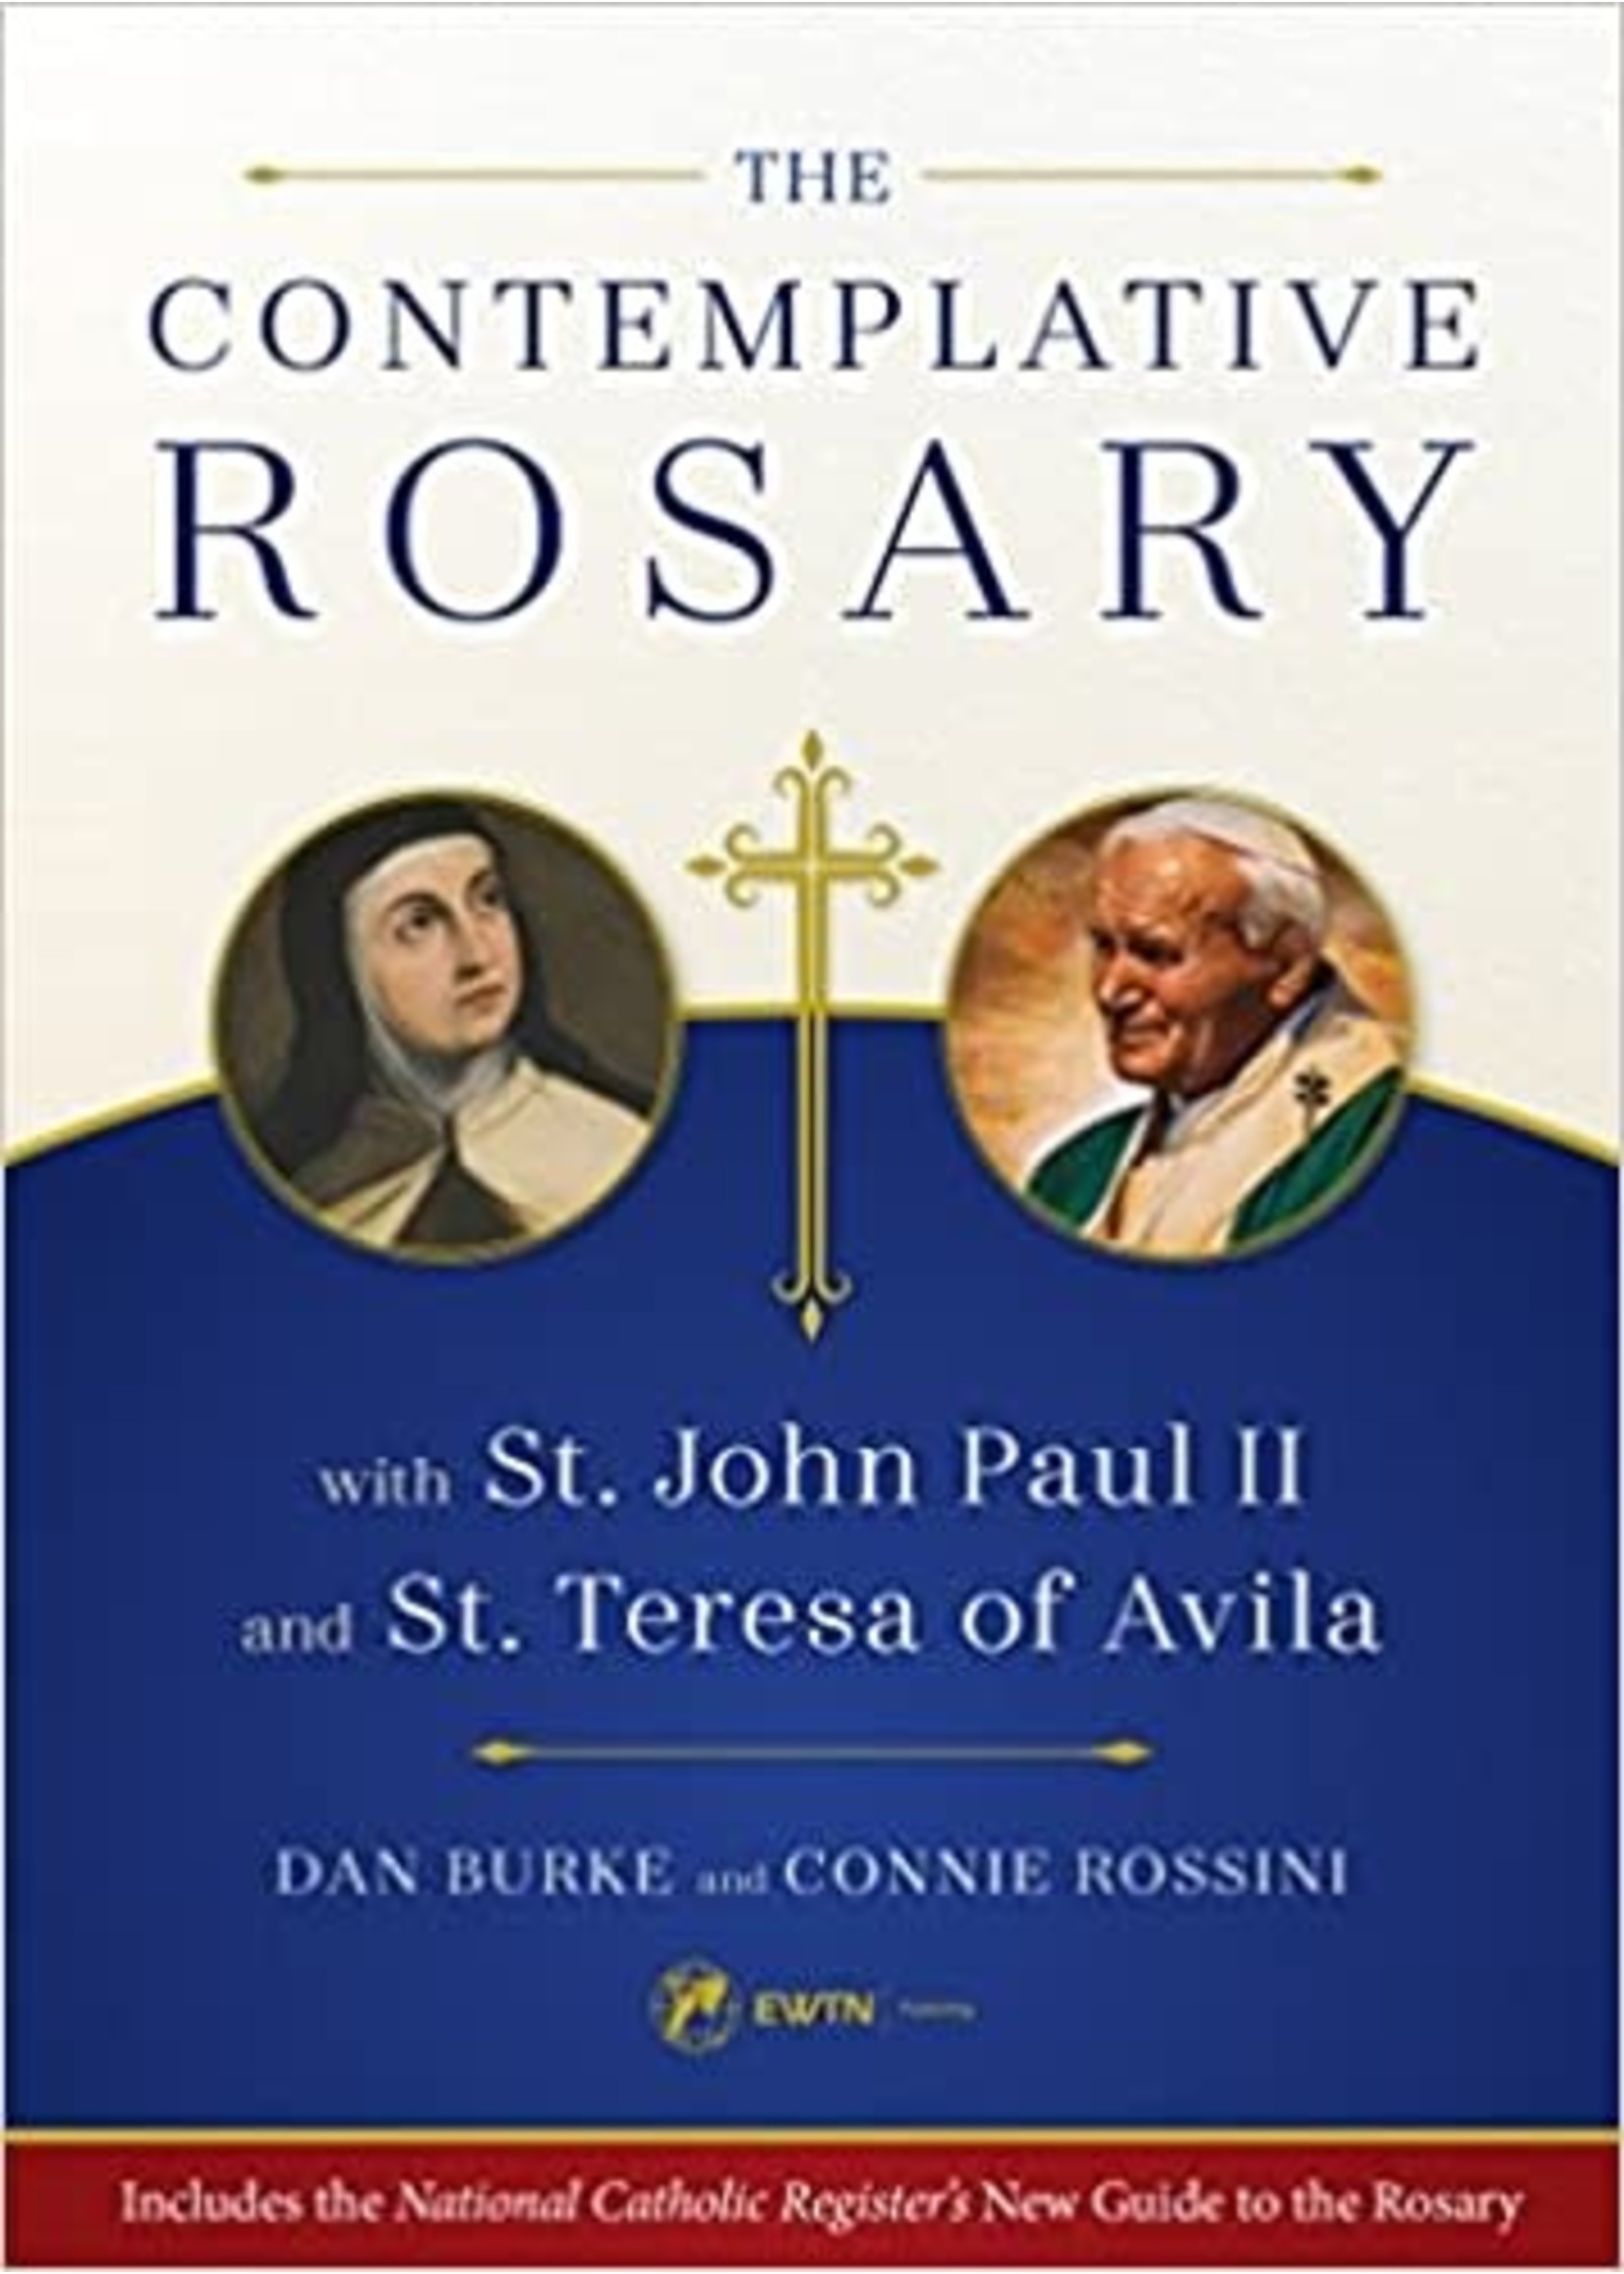 The Contemplative Rosary with St John Paul II and St Teresa of Avila